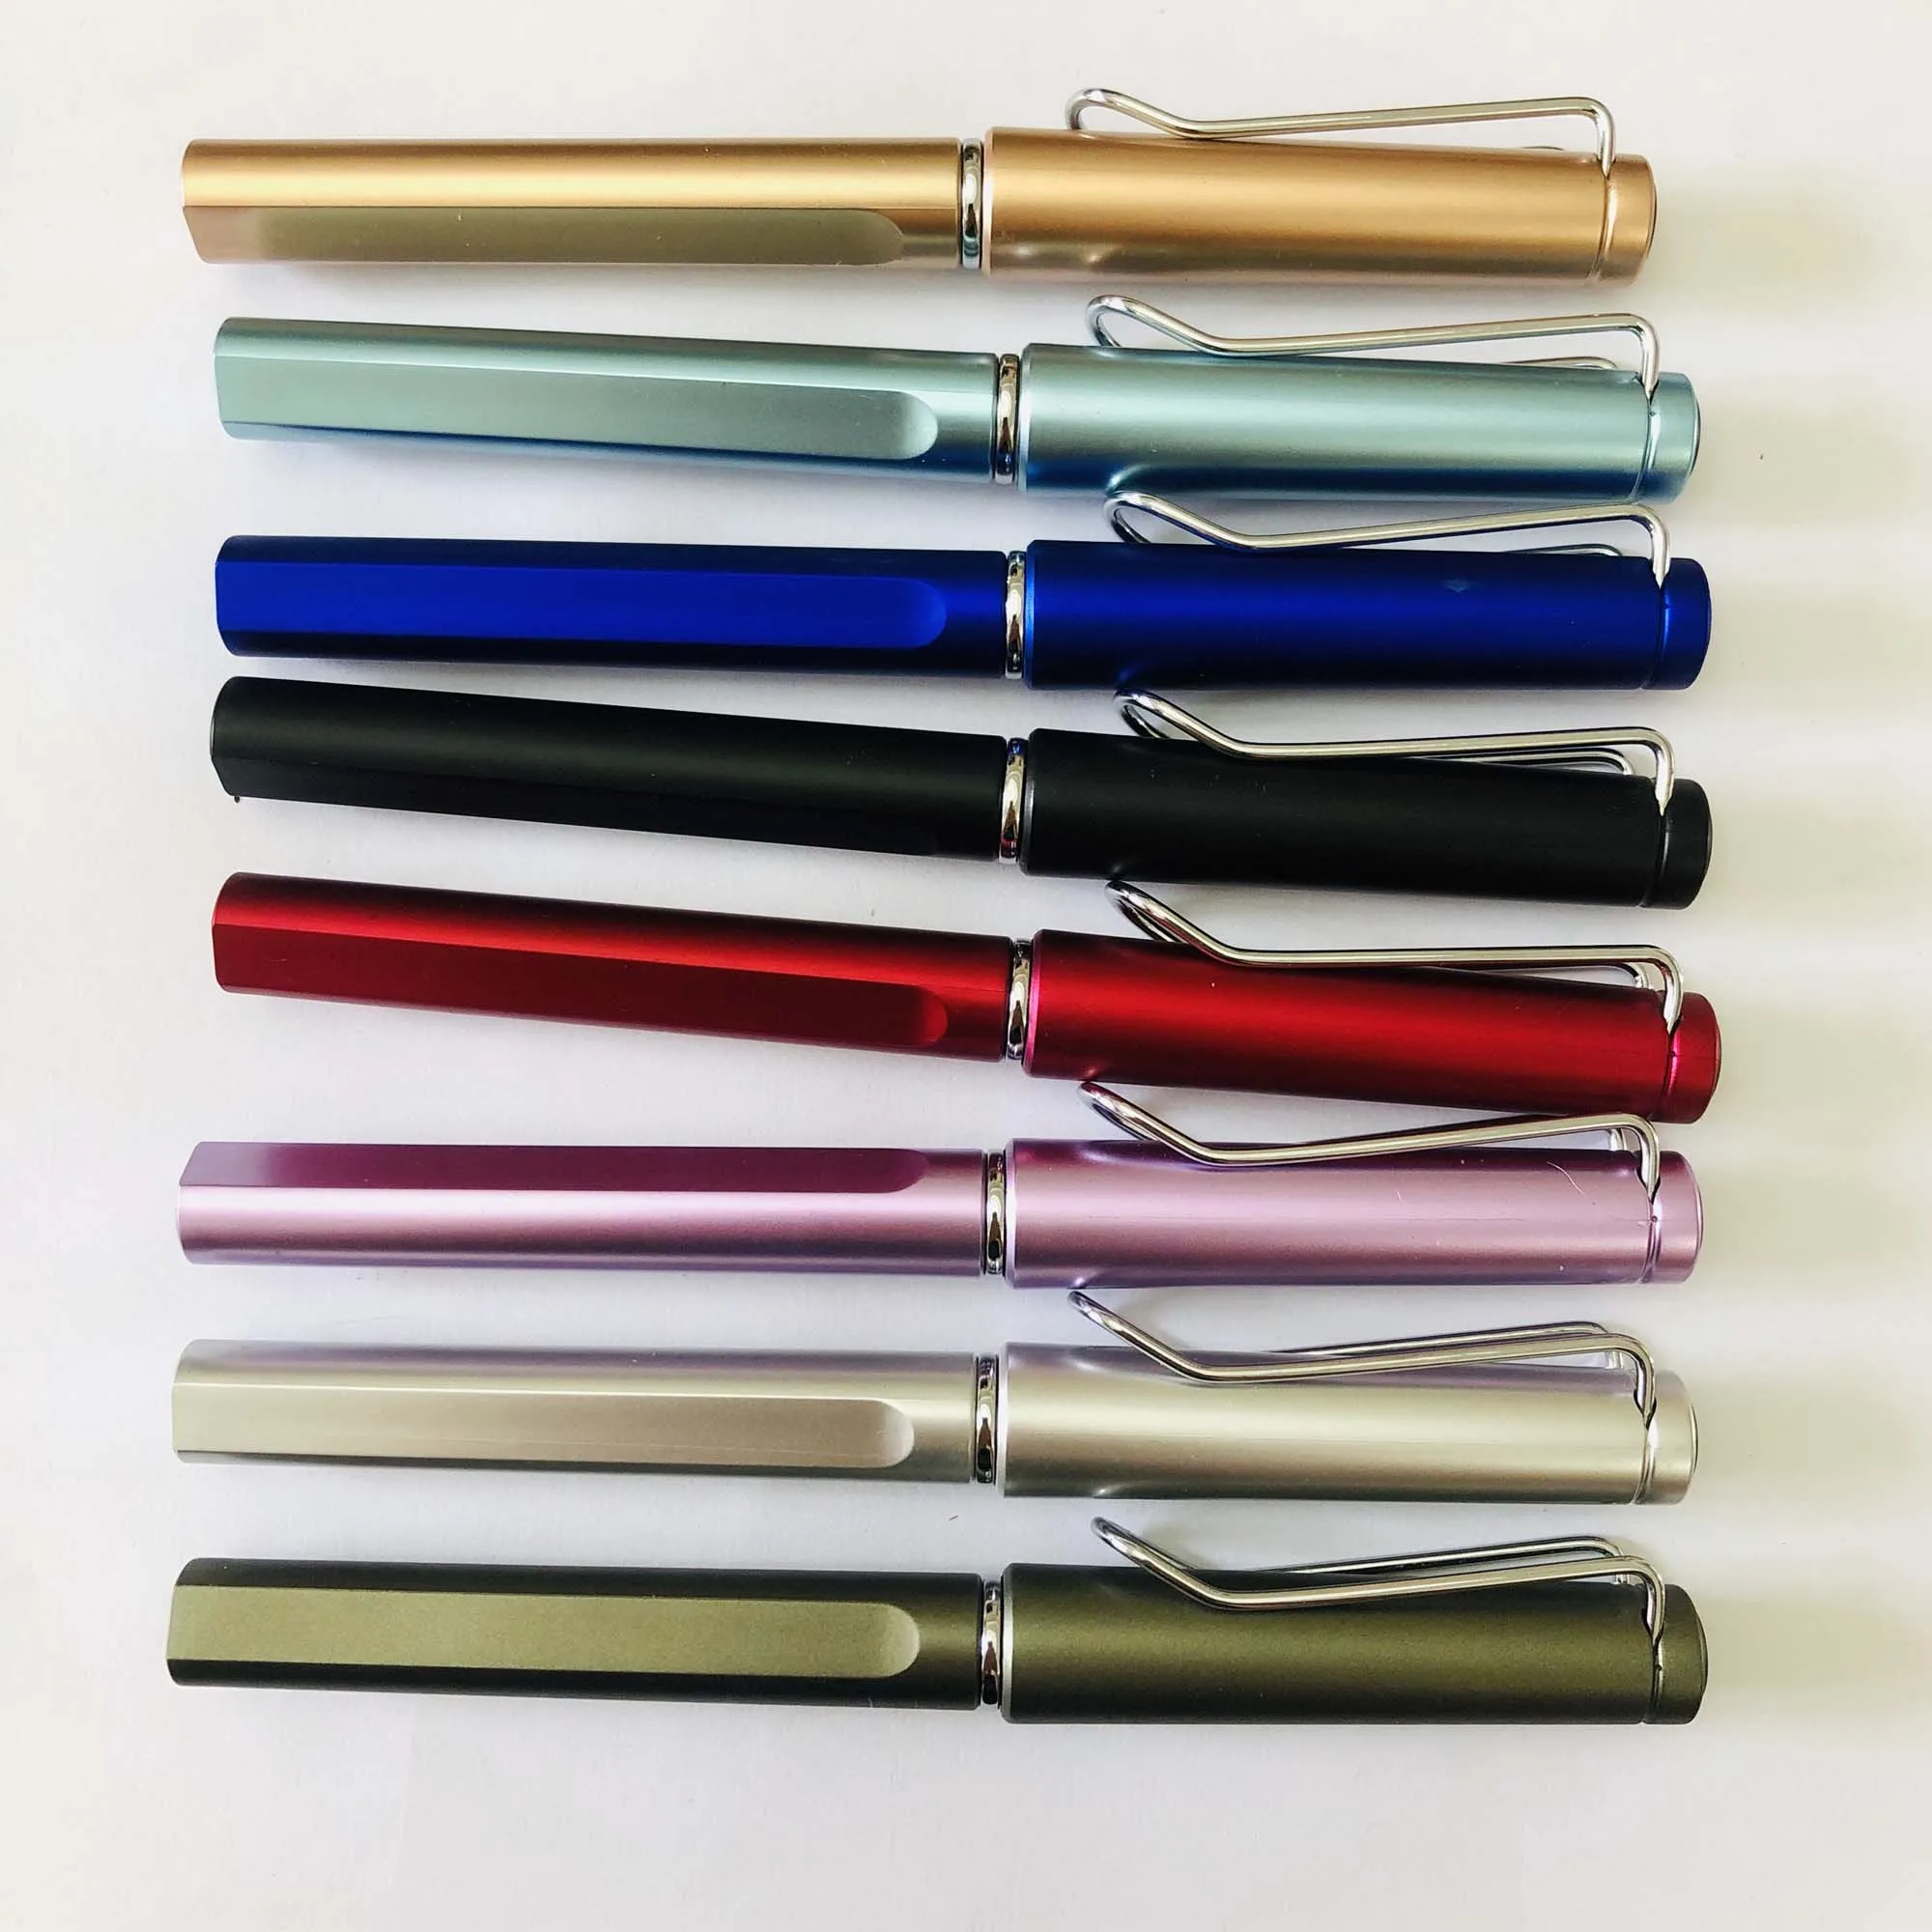 

High quality Neutral Pen Custom Stamping Advertising Pen Custom LOGO Gift Black Water Business gel promotion hotel company Pen, Black,red,blue,silver,grey,purple,teal,gold